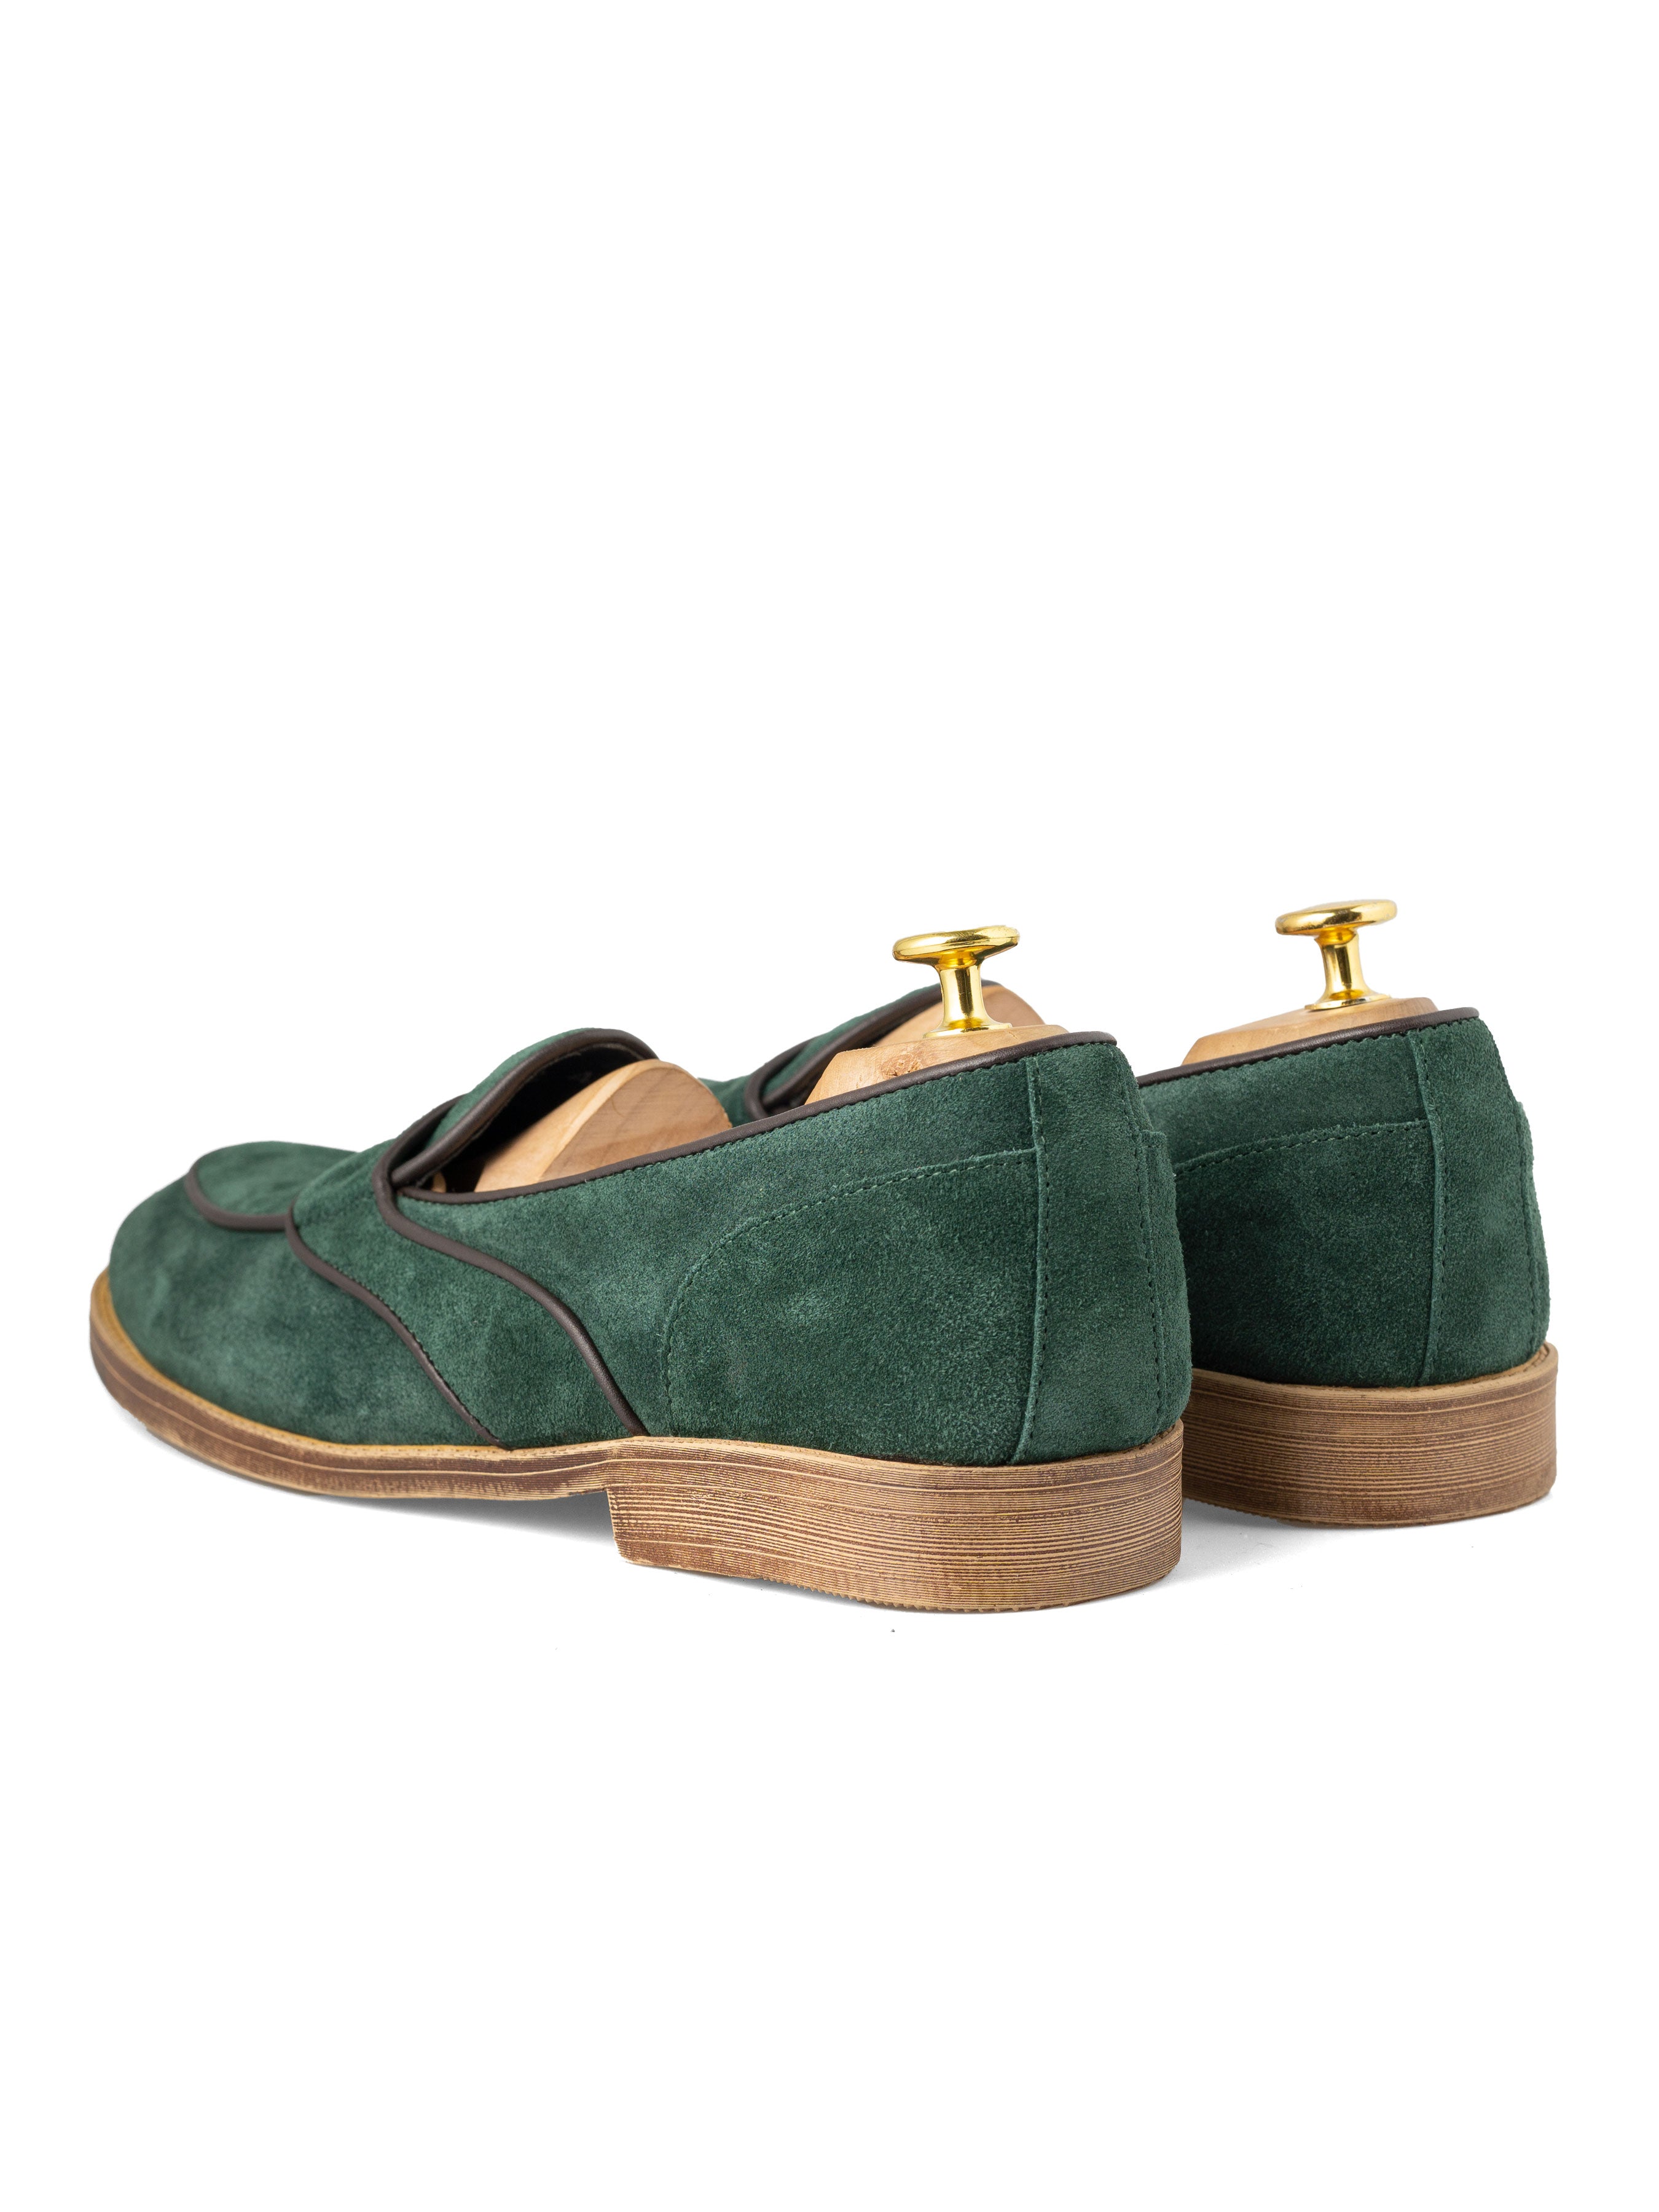 Belgian Loafer - Emerald Green Suede Leather With Penny Strap Piping (Flexi-Sole) - Zeve Shoes